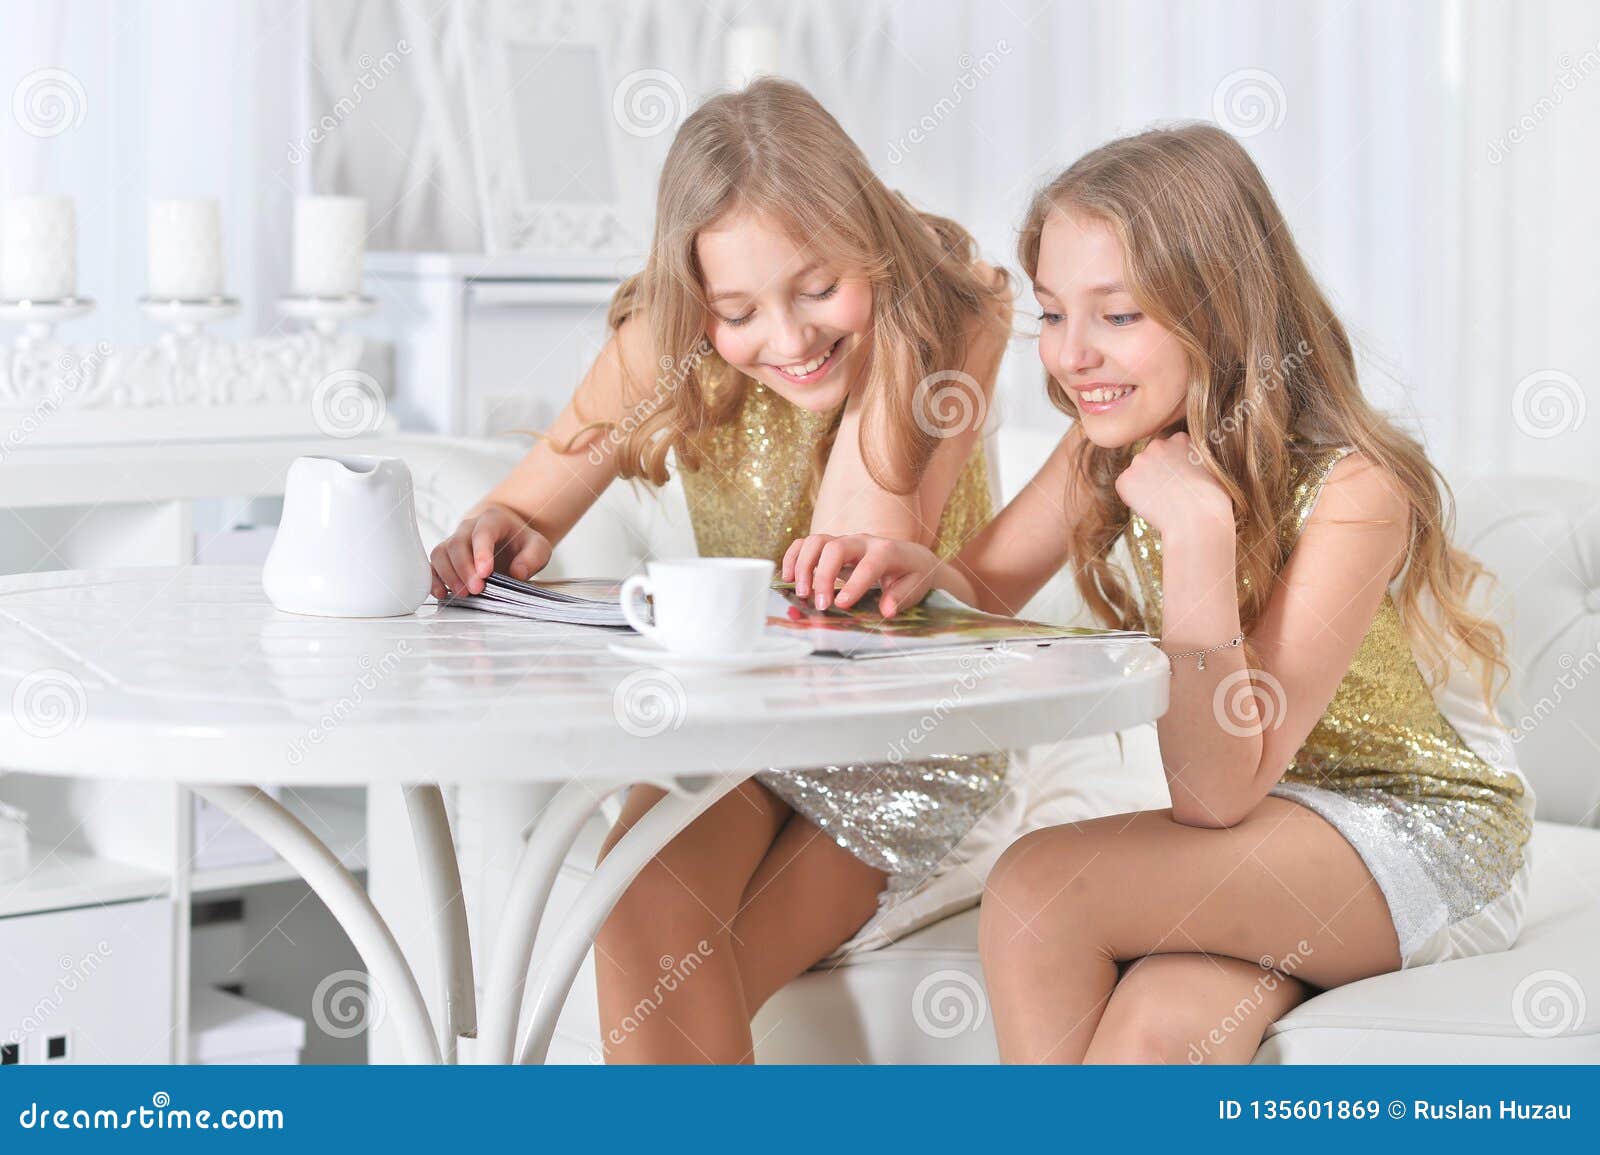 cute twin sisters sitting at kitchen table